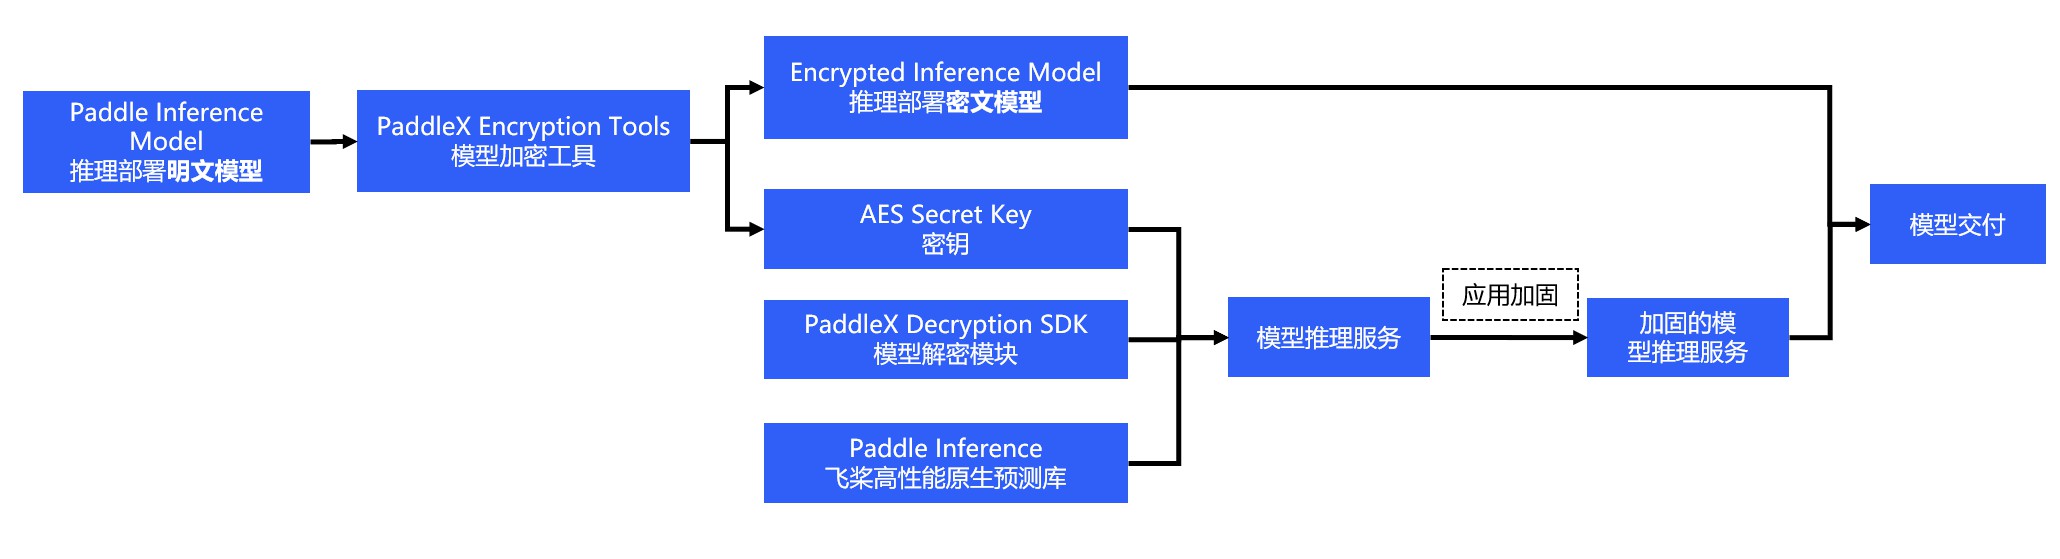 ../../_images/encryption_process.png